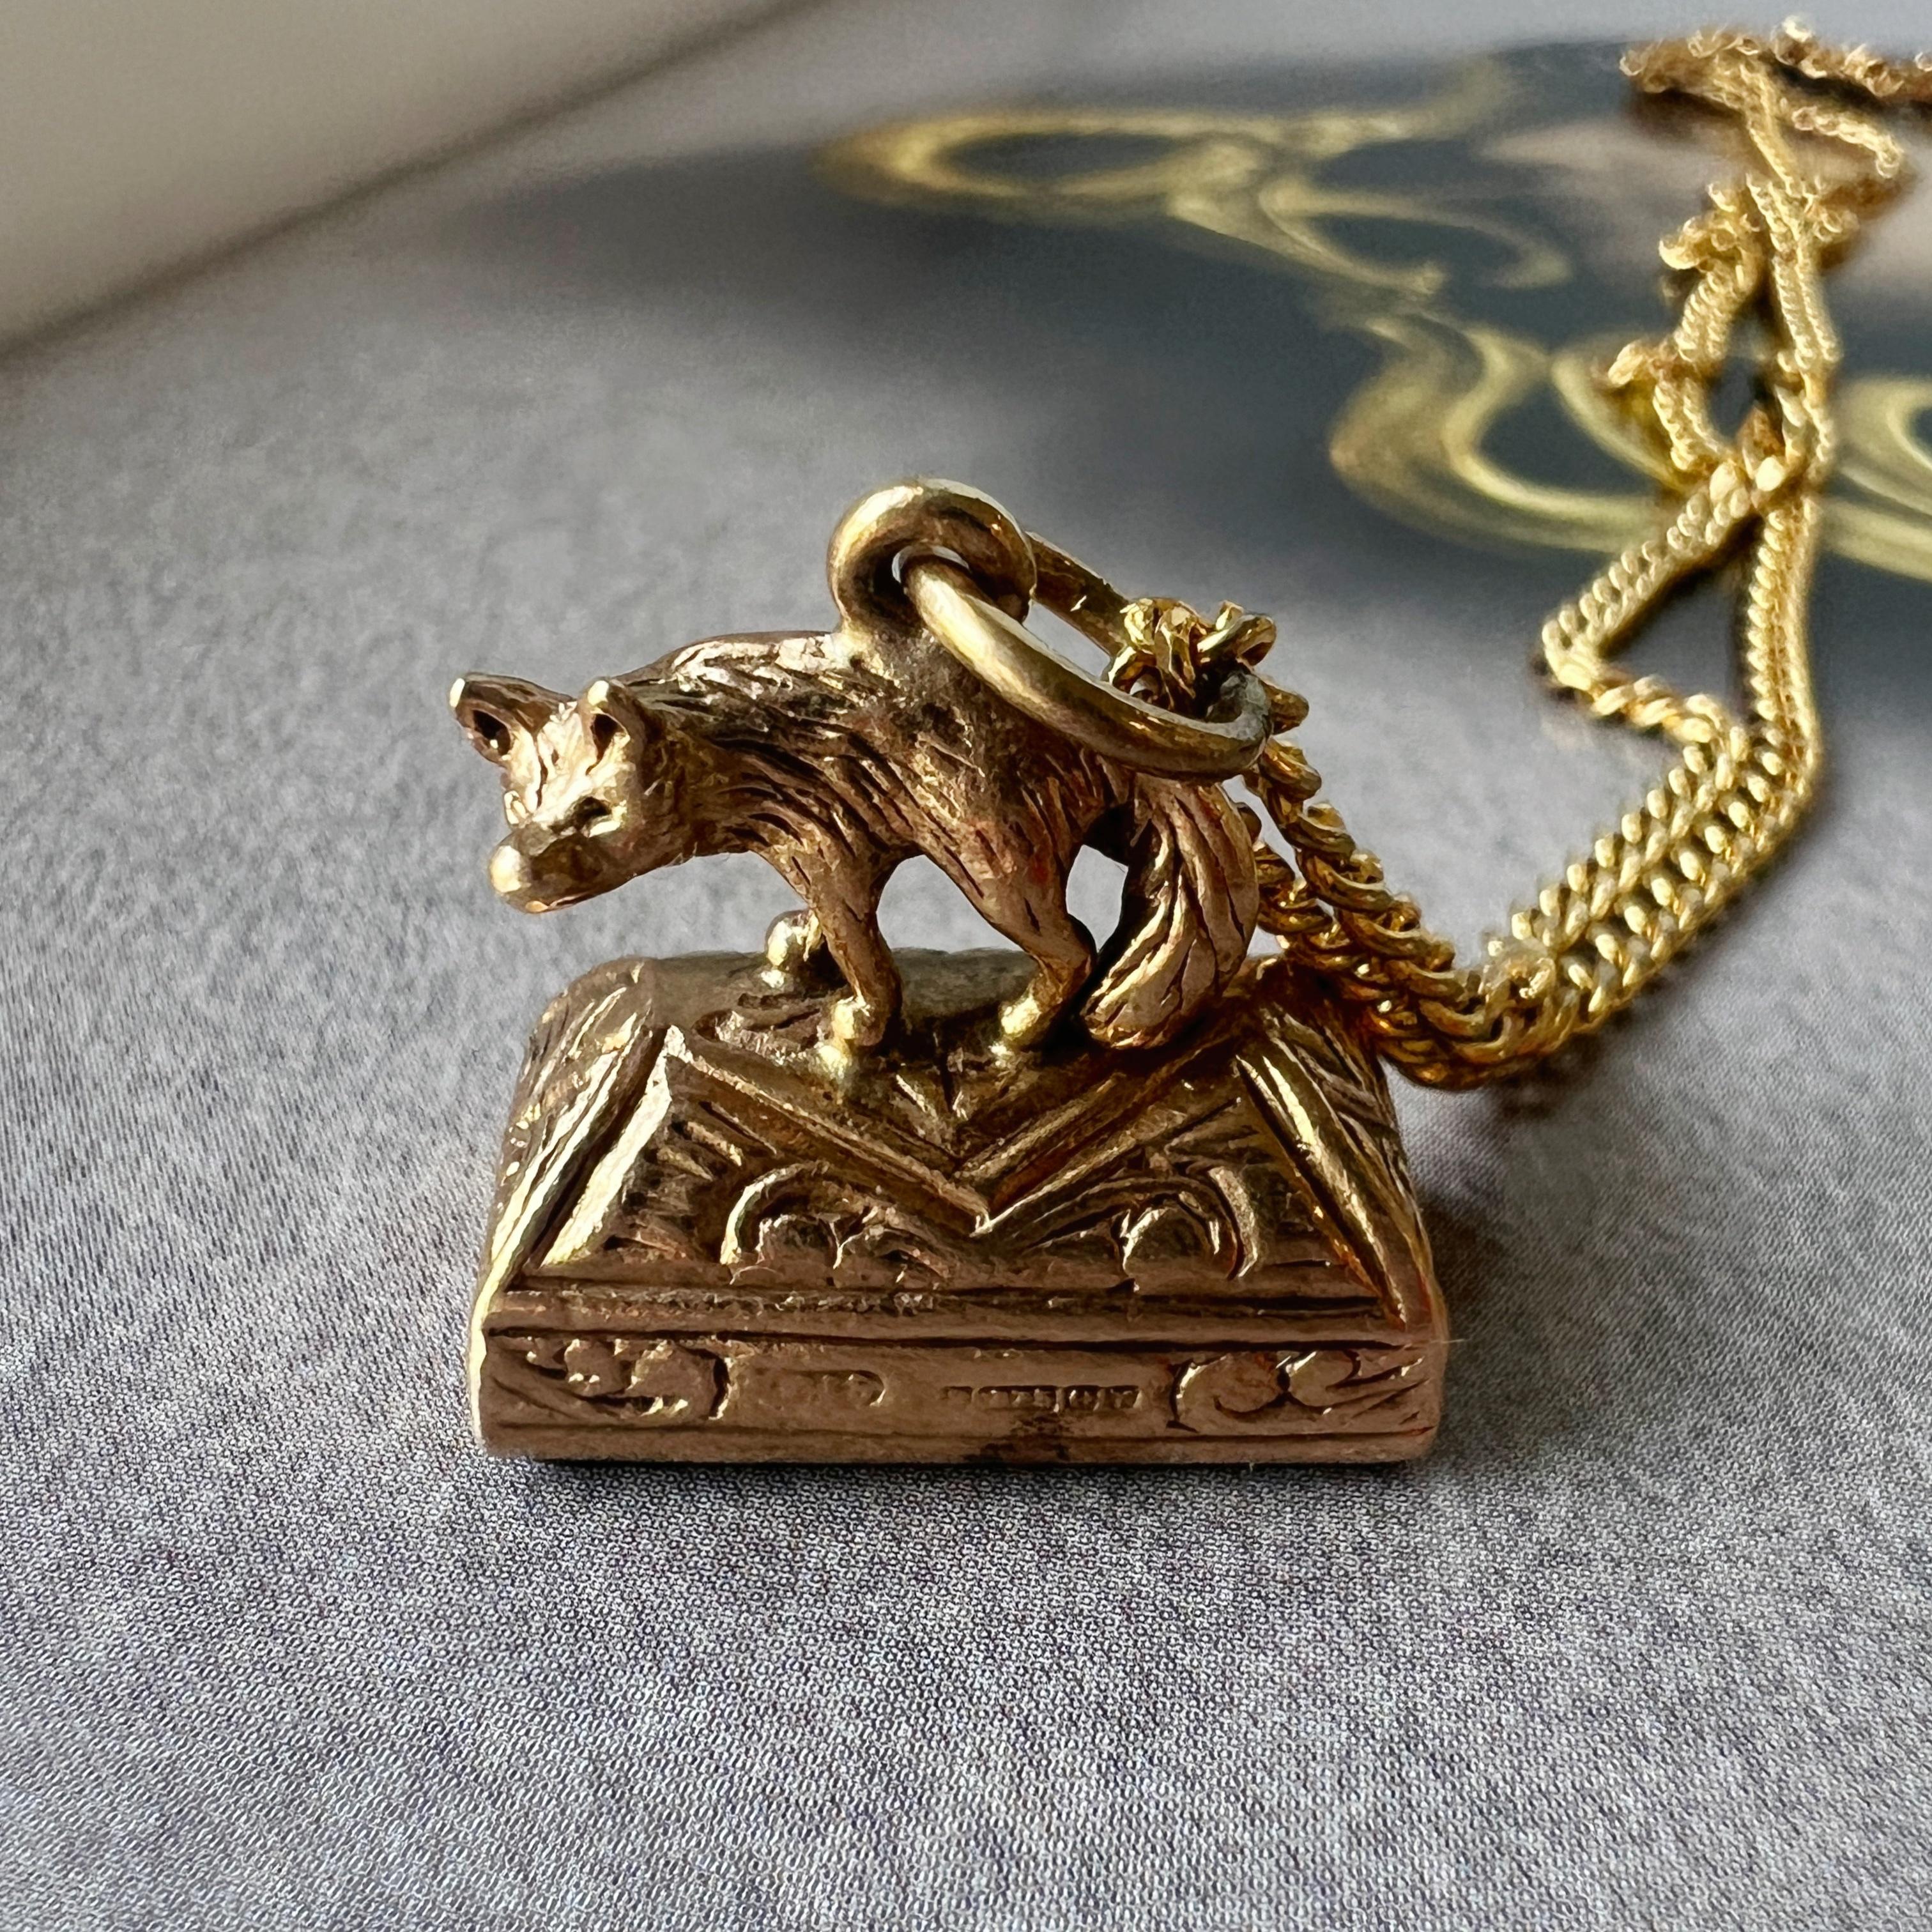 Transport yourself to the charm of the Victorian era with this very cute, English work antique 9K gold fob pendant. Crafted with meticulous attention to detail, it features a captivating fox miniature perched atop a seal made from bloodstone.

The